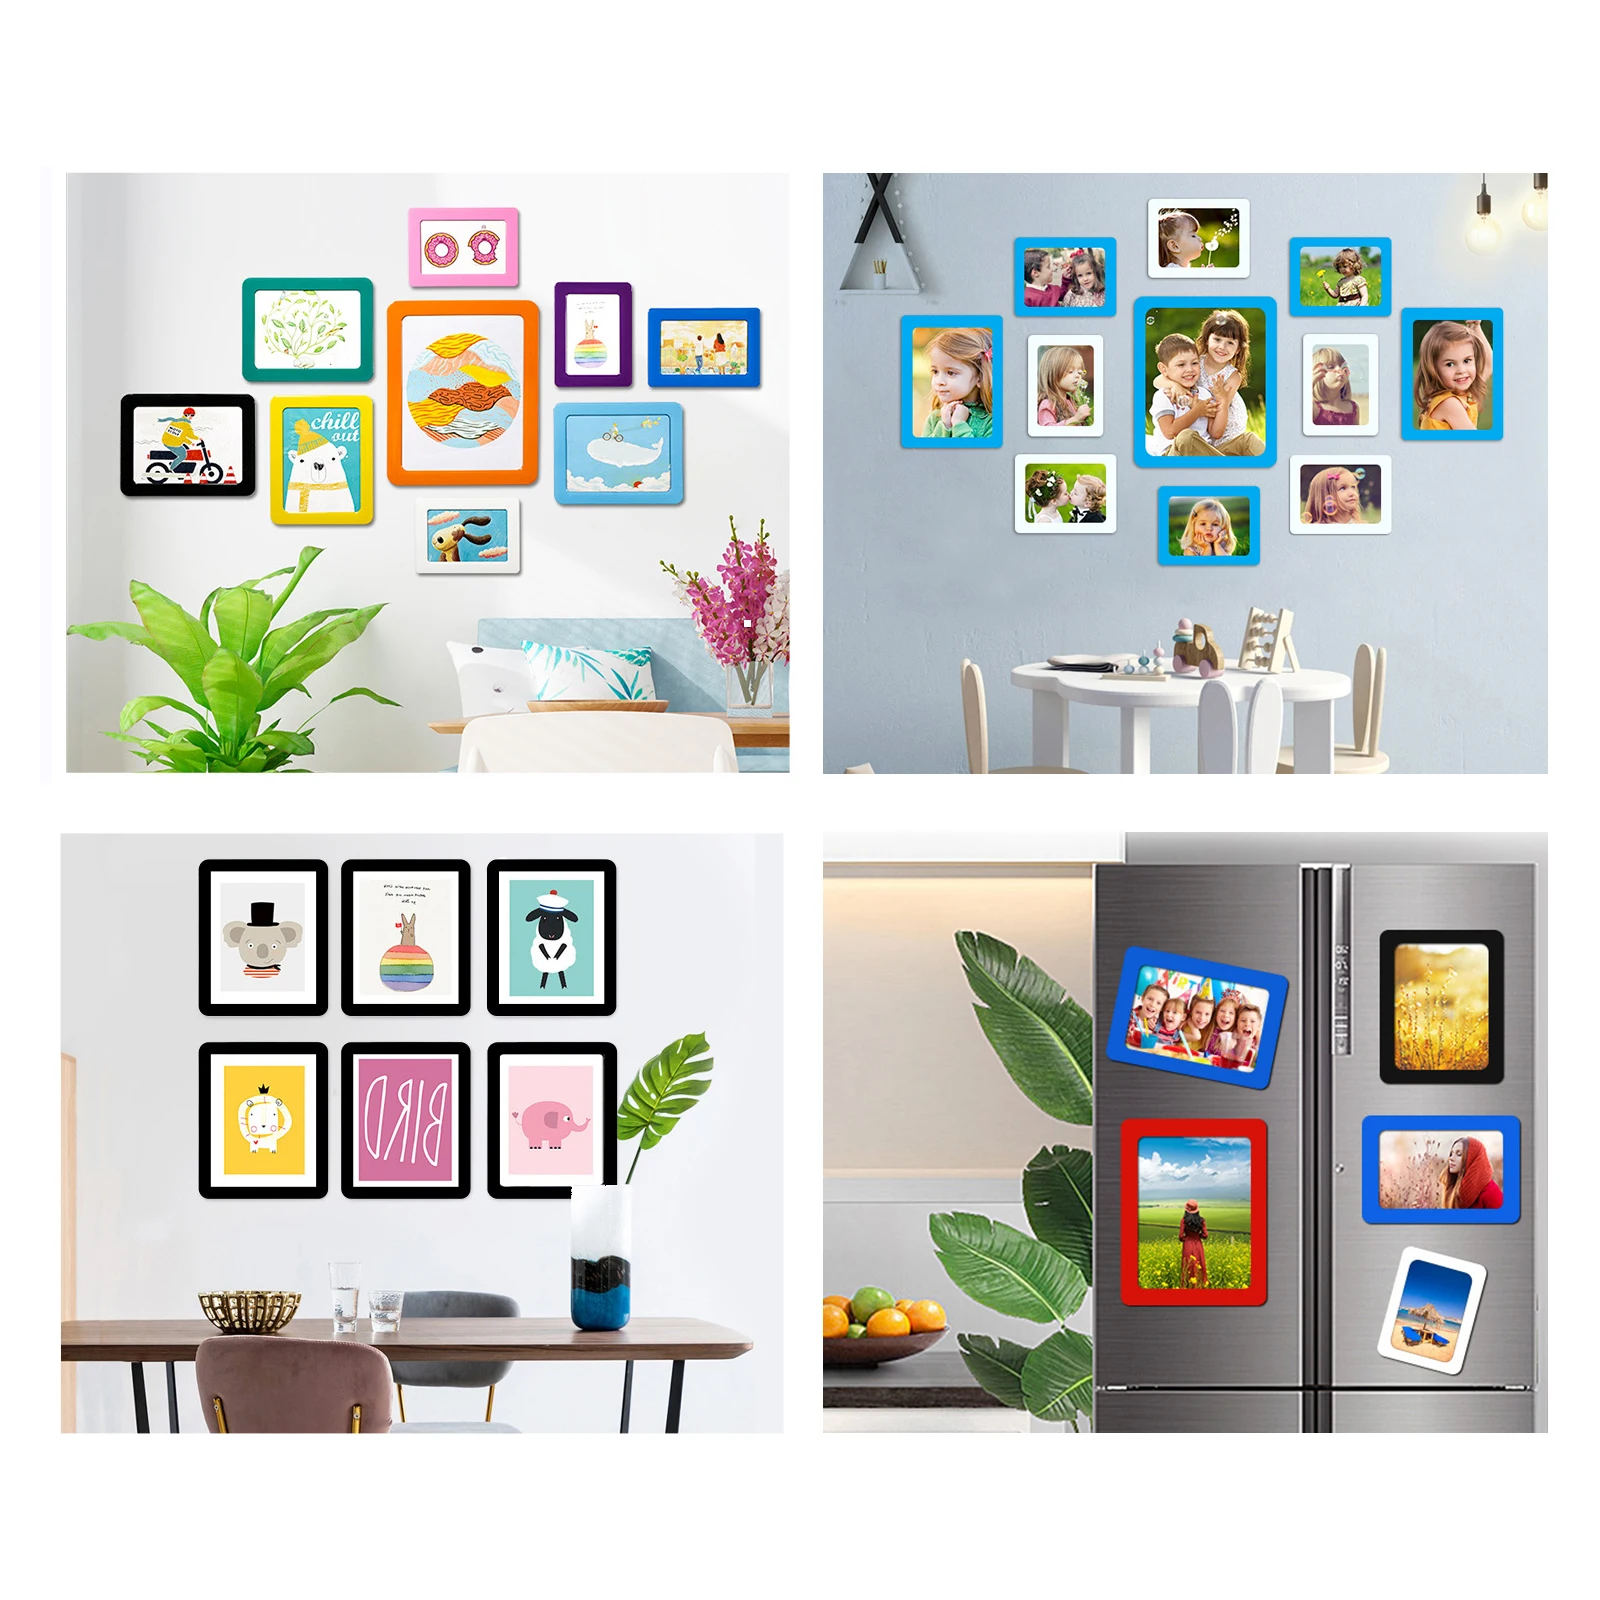 6inch Colorful Magnetic Picture Frames Photo Magnets Photo Frame For Refrigerator Perfect For Family Photos And Memories Hot images - 6